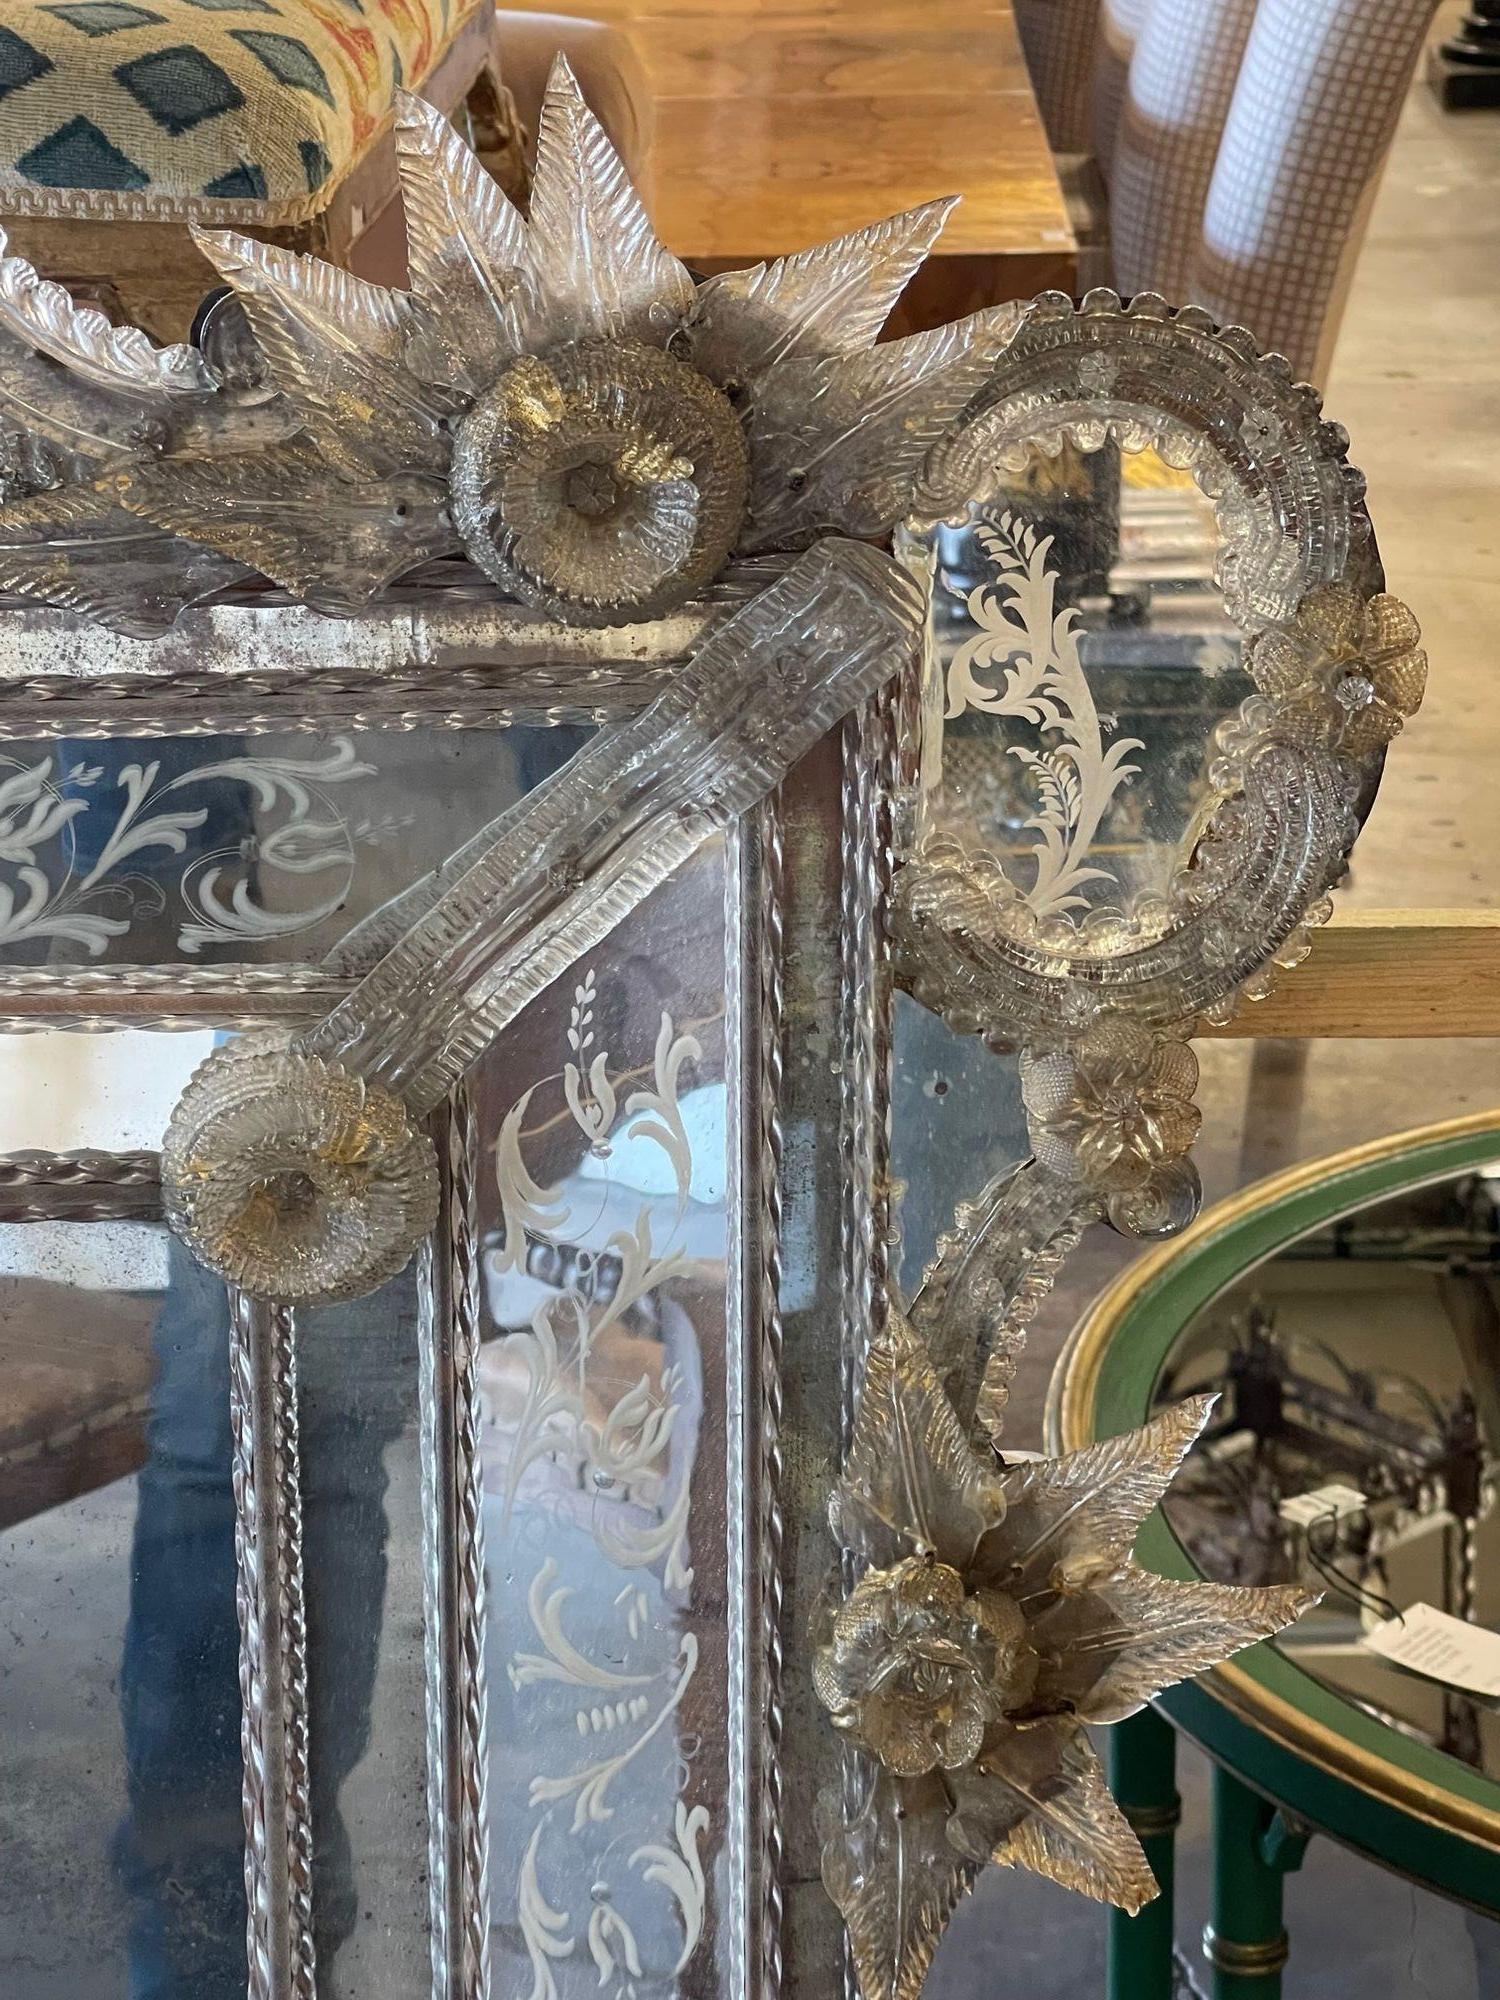 Exceptional 19th century Venetian etched glass mirror with leaves and flowers. Beautiful scrolling shape along with glistening glass in silver and gold. A real work of art that is sure to impress!! Gorgeous!.